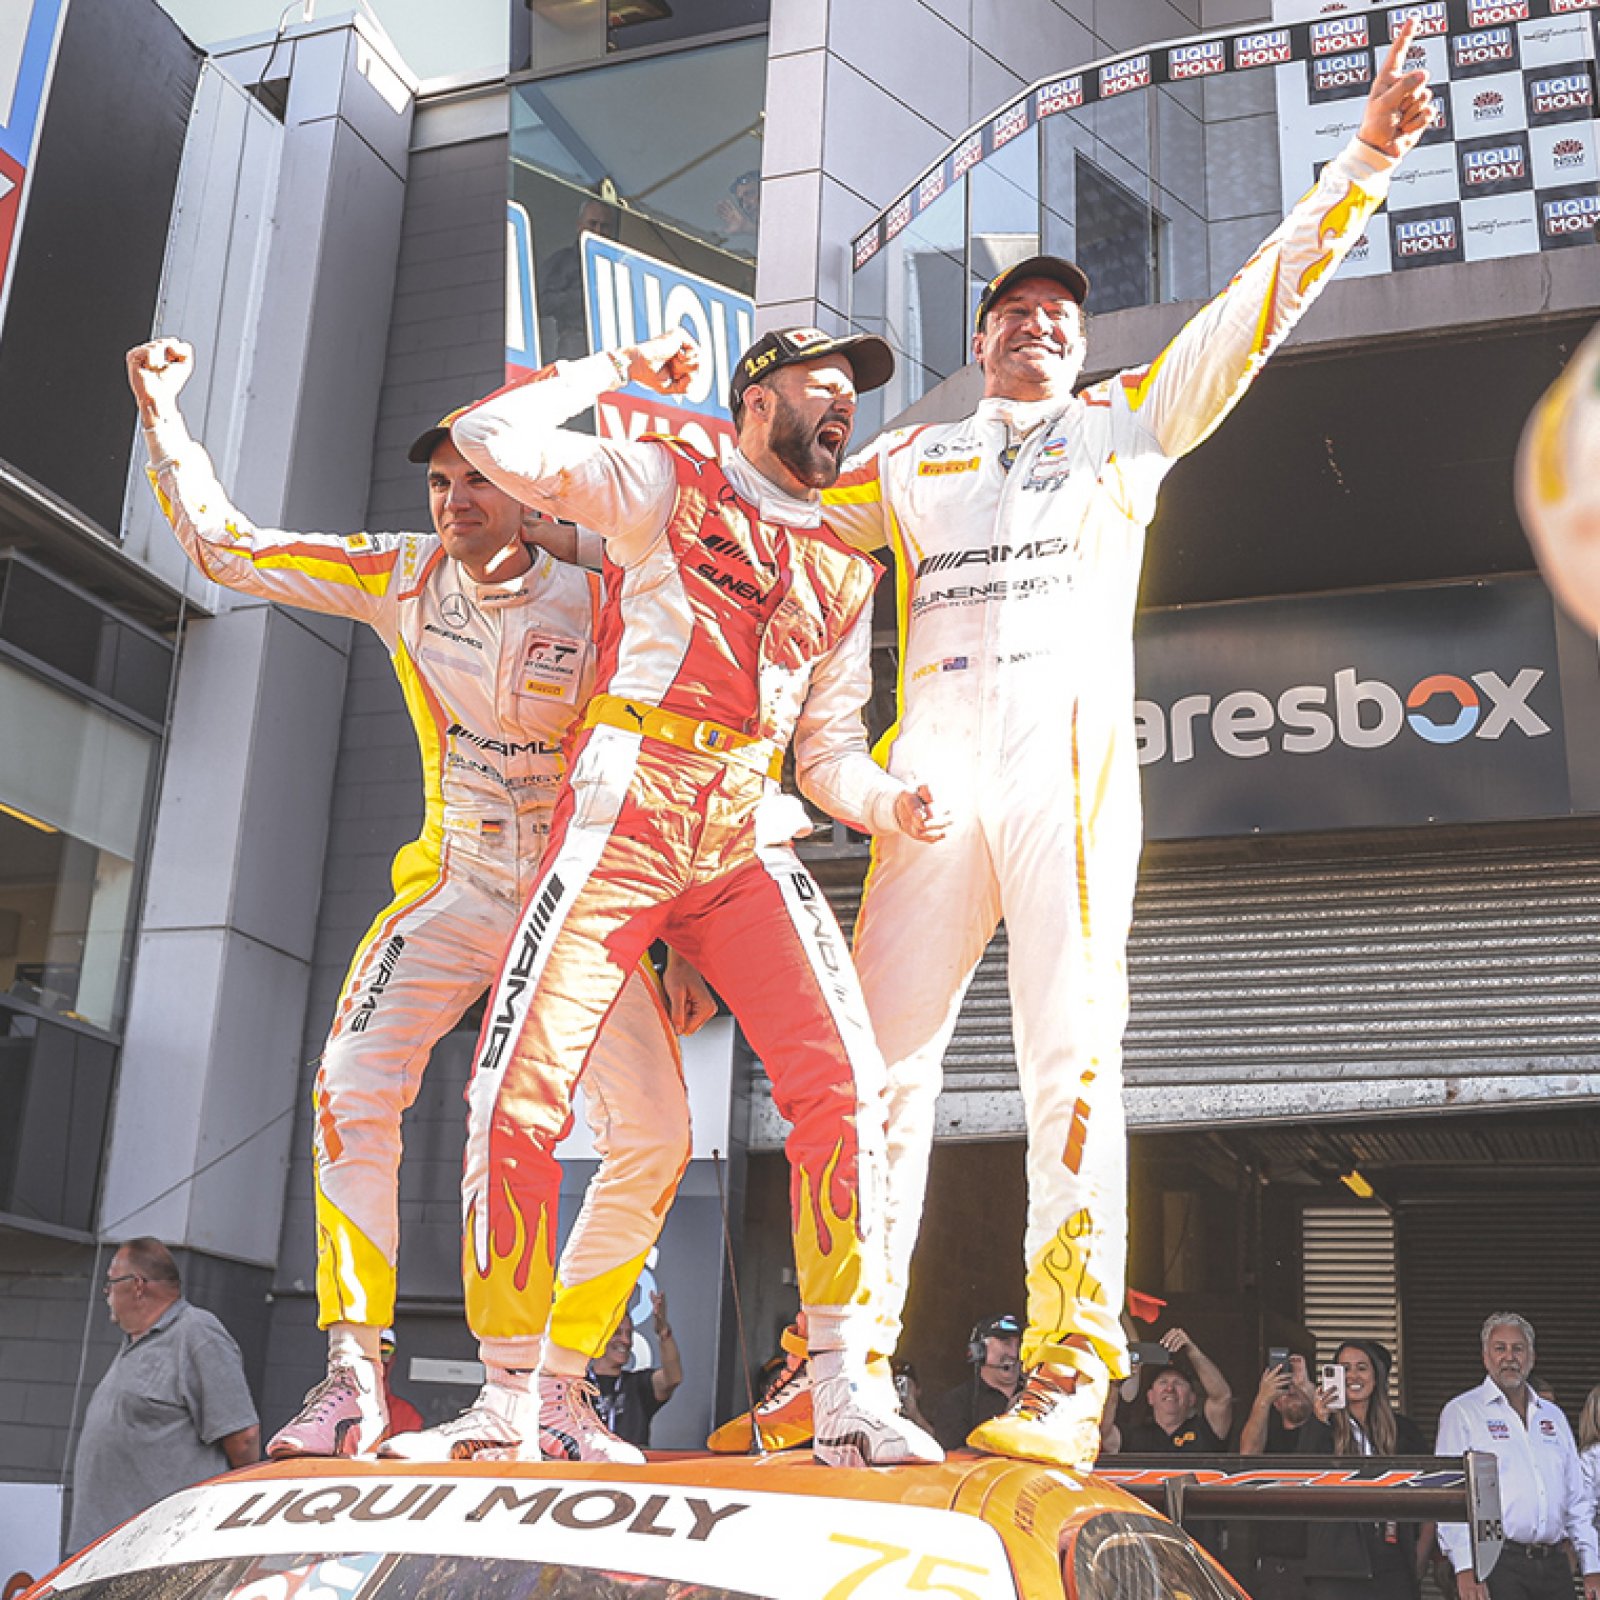 SUNENERGY1 AND MERCEDES-AMG GO BACK-TO-BACK IN RECORD-BREAKING LIQUI MOLY BATHURST 12 HOUR